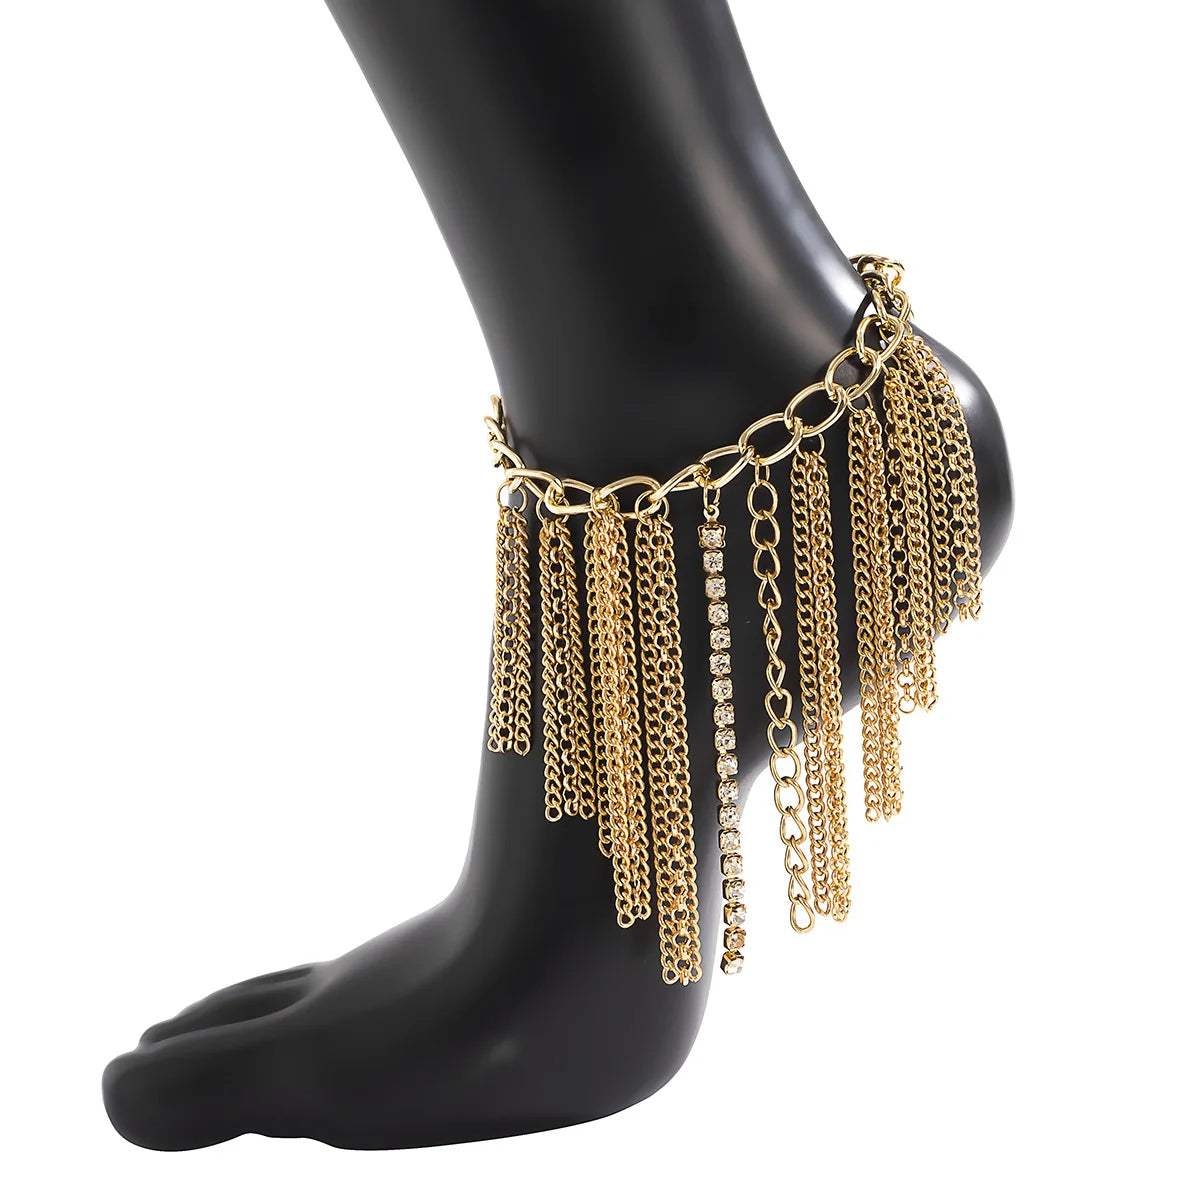 Elegant anklet with long dangling chains